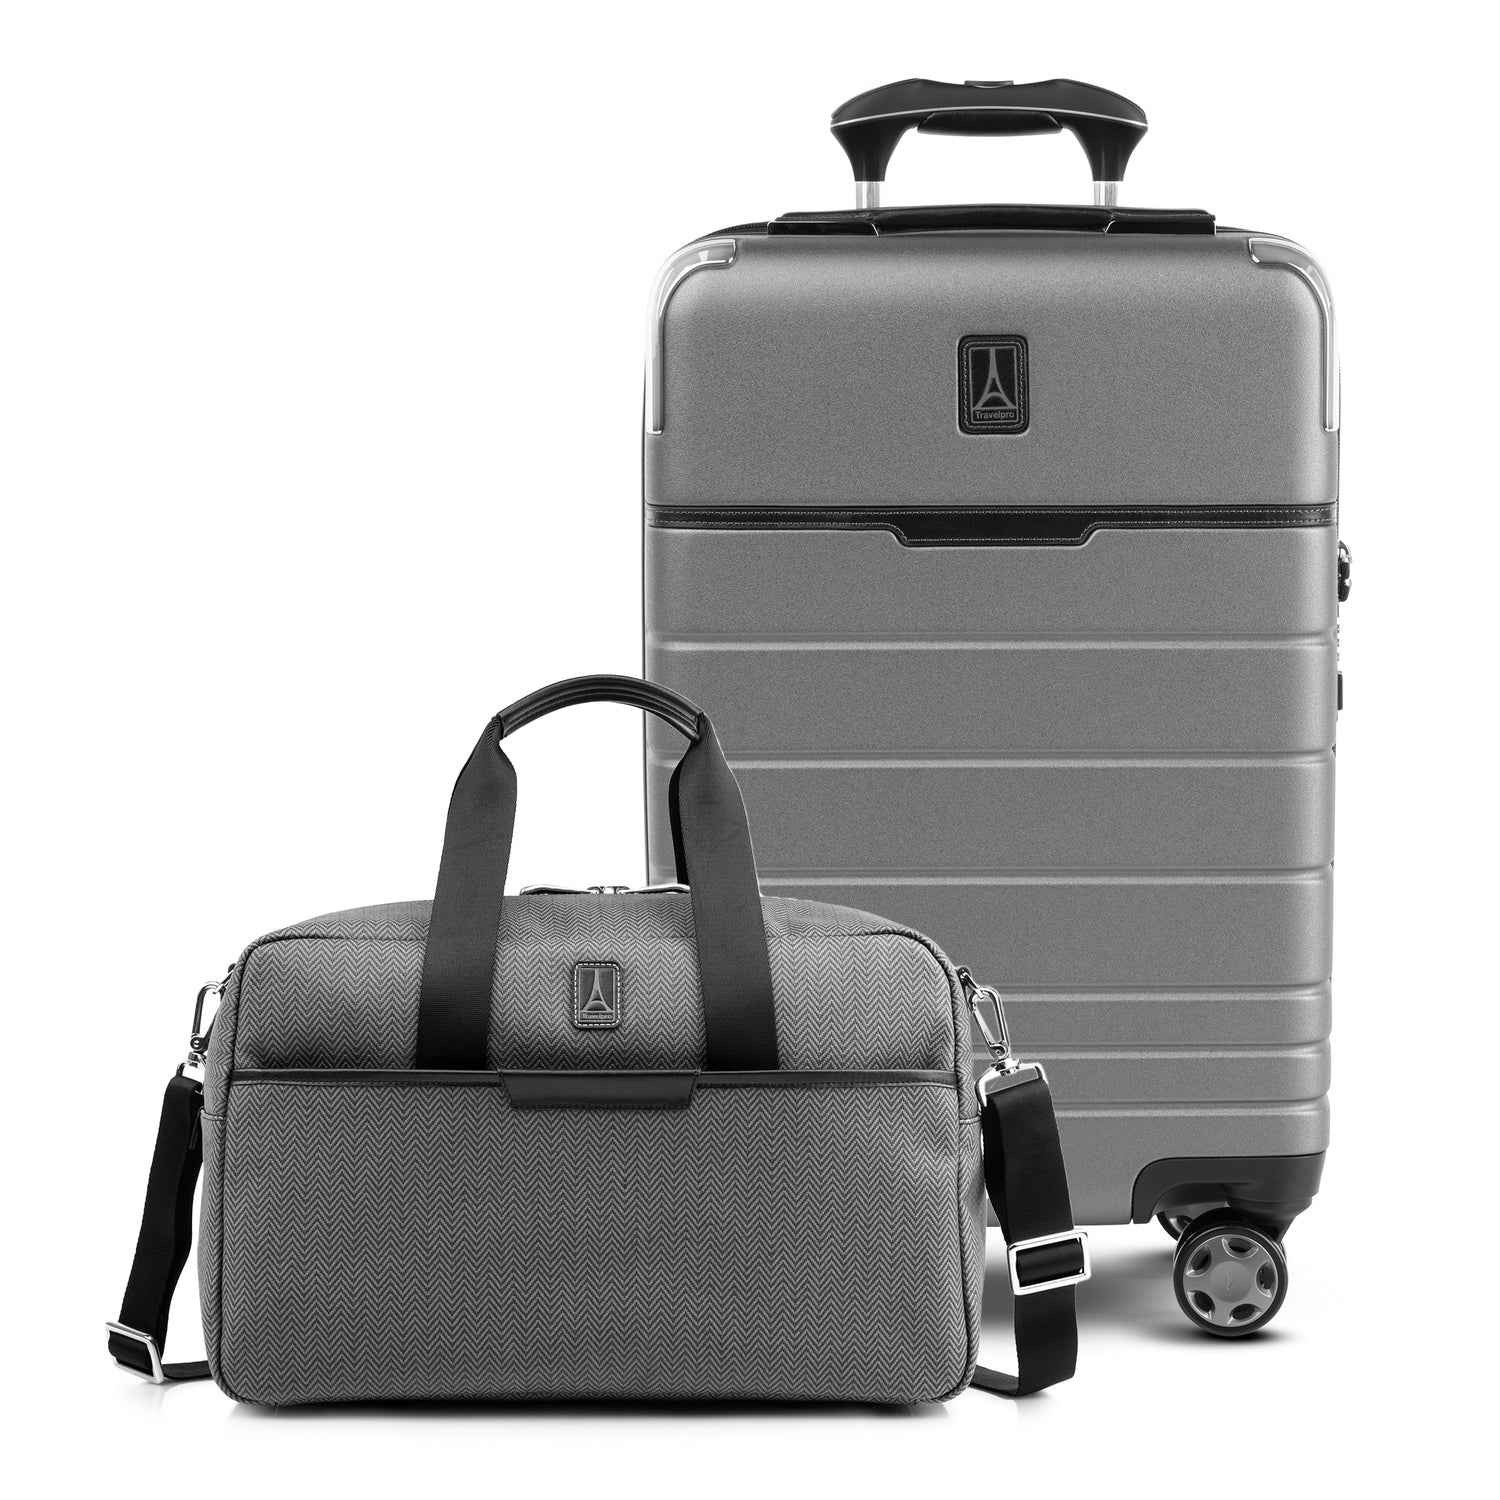 Travelpro x Travel + Leisure Carry-on Spinner and UnderSeat Tote Lug